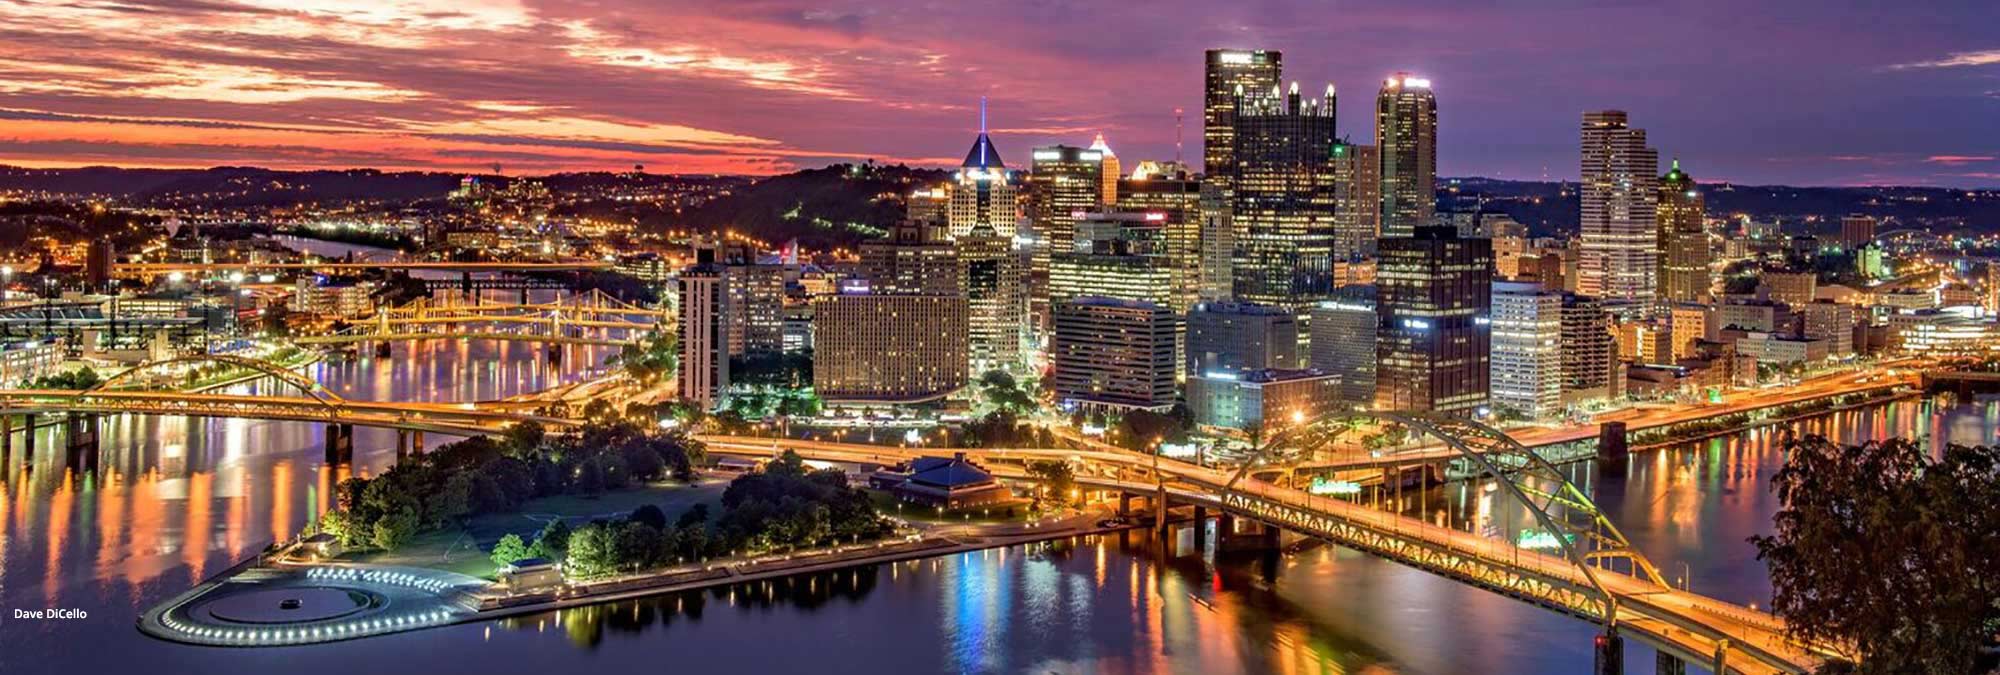 City of Pittsburgh - Announcements, Special Events, Press Releases, City Permits, Careers, Pay your taxes, view Burgh's Eye View and more!